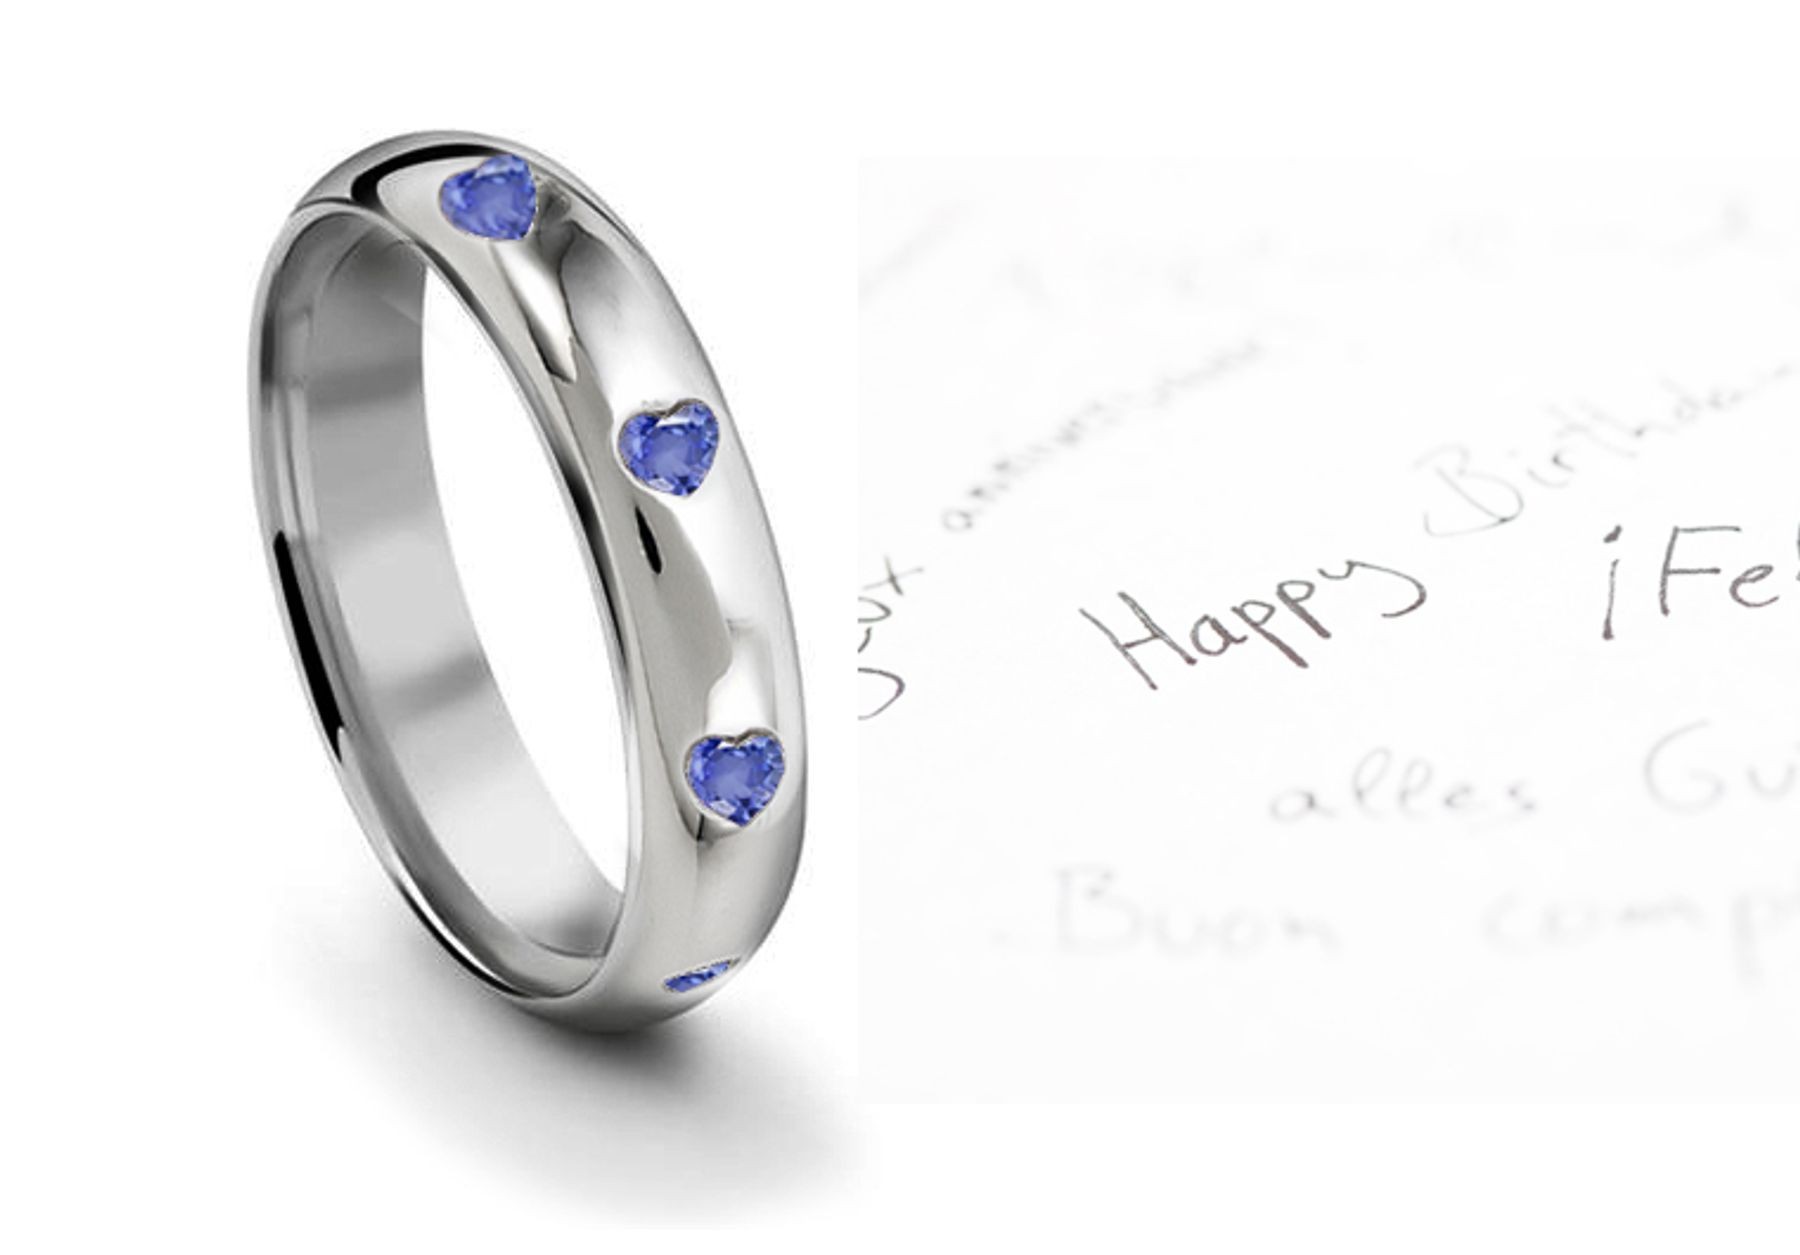 View Appreciate Burnish Set Heart Blue Sapphire Eternity Ring From All The Angles